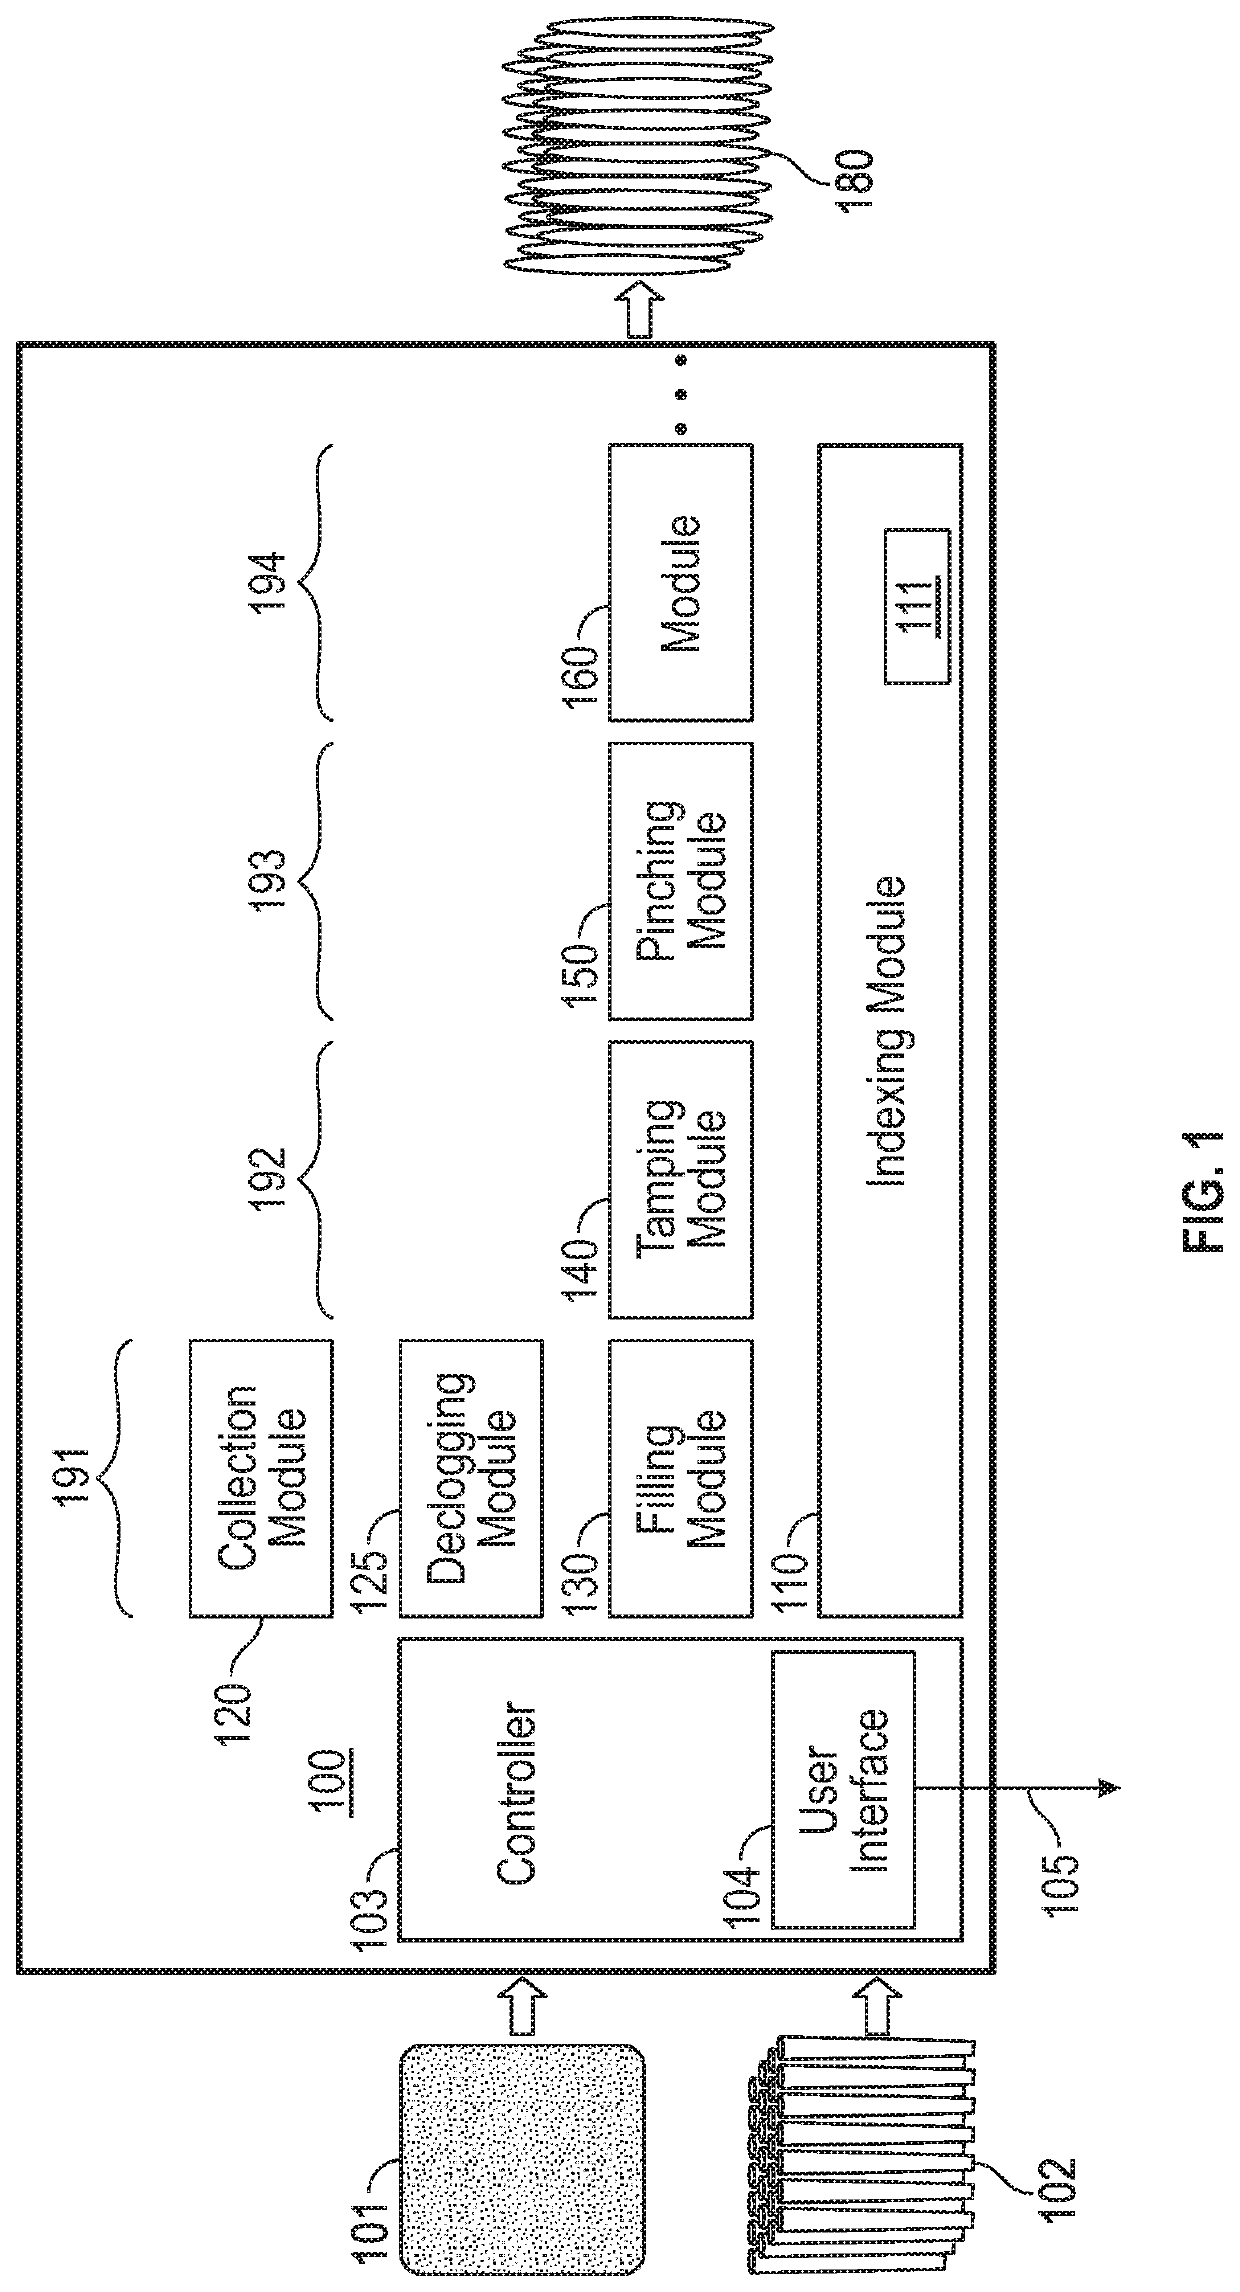 Systems and methods for automated production of cigarettes